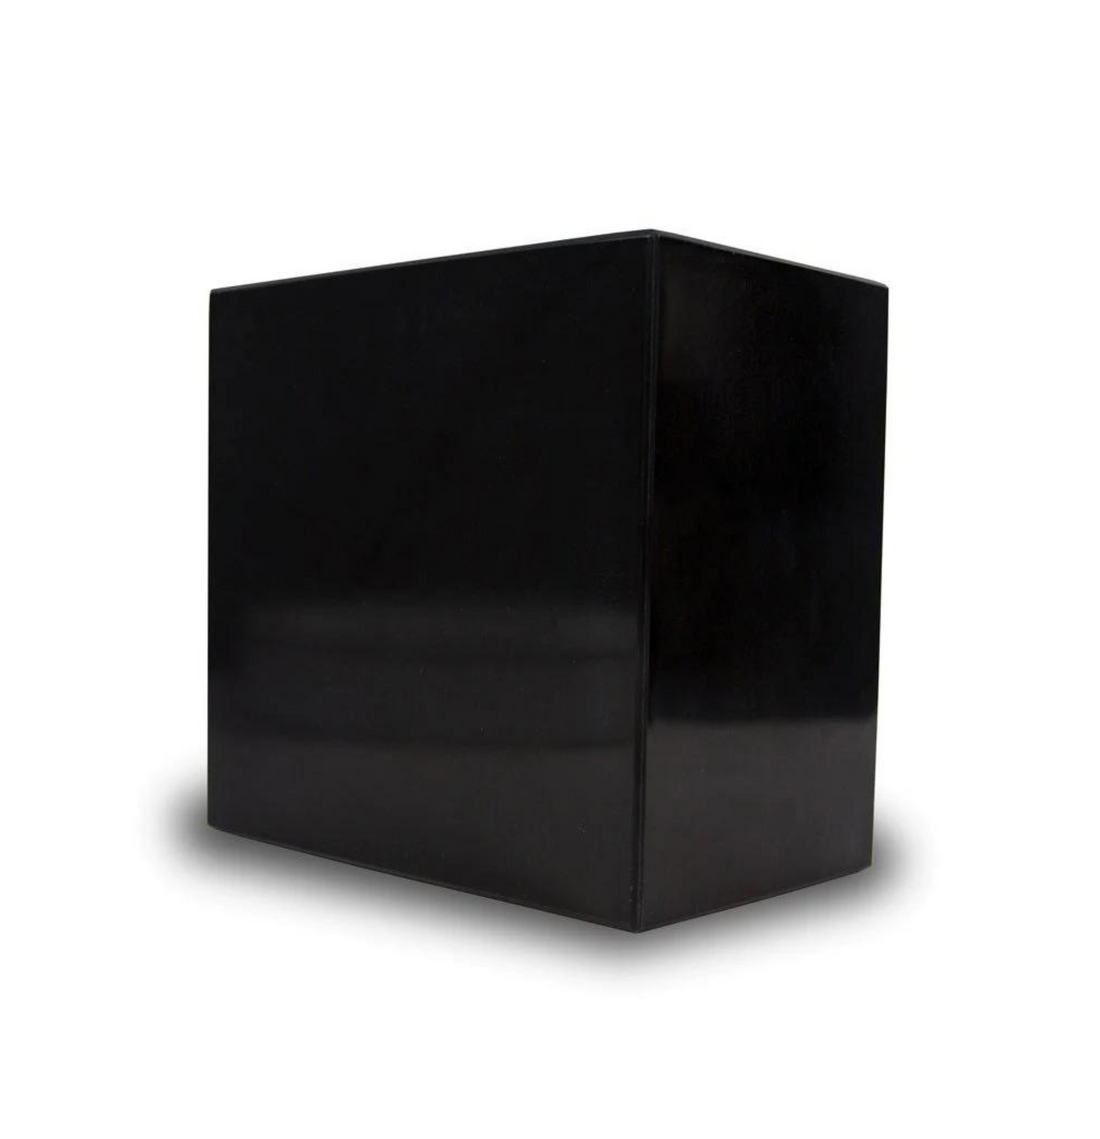 The Centre Urn in Black Marble